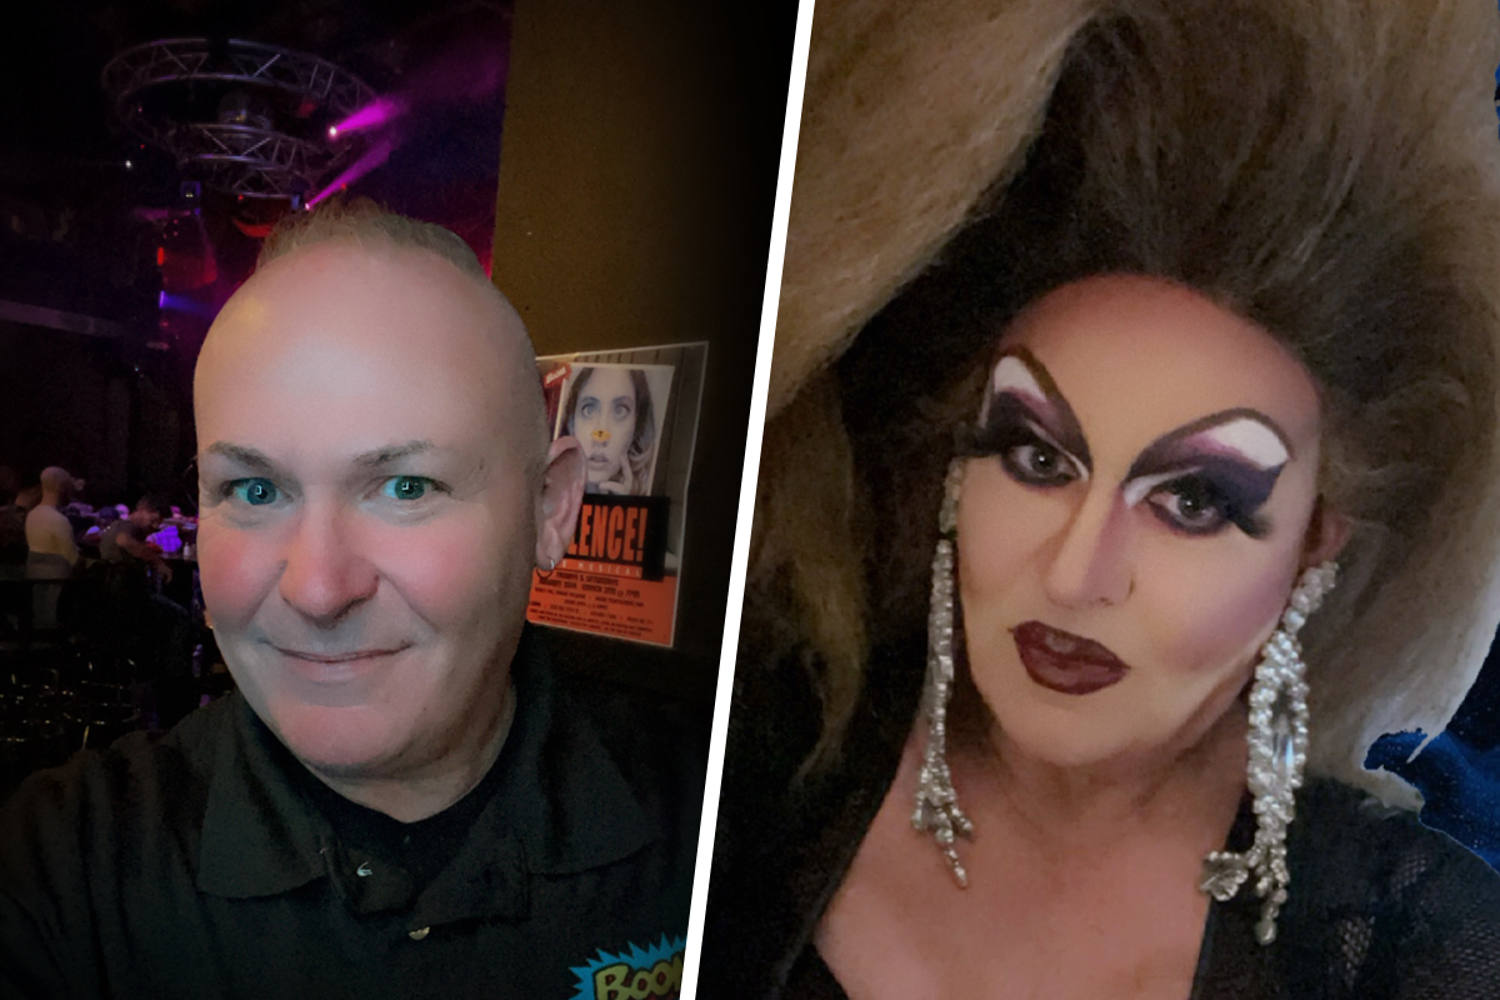 Principal with drag queen side gig resigns under pressure from Oklahoma schools official